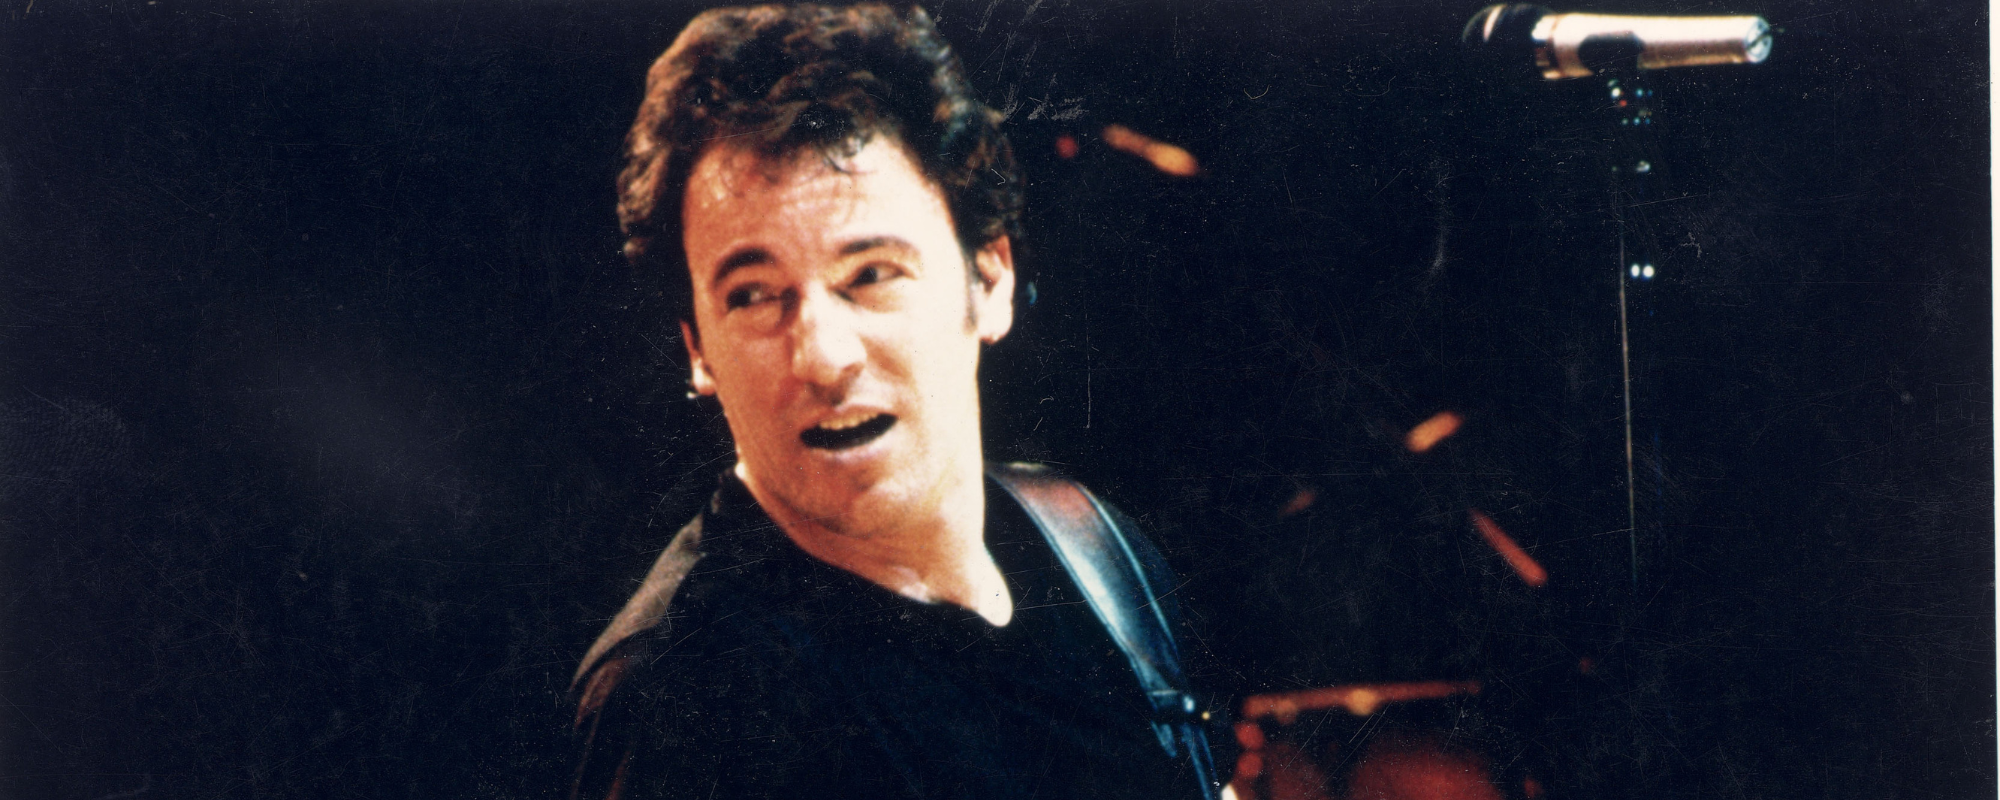 From Murder Ballads to Mansions: All Songs on Bruce Springsteen’s Chilling ‘Nebraska,’ Ranked